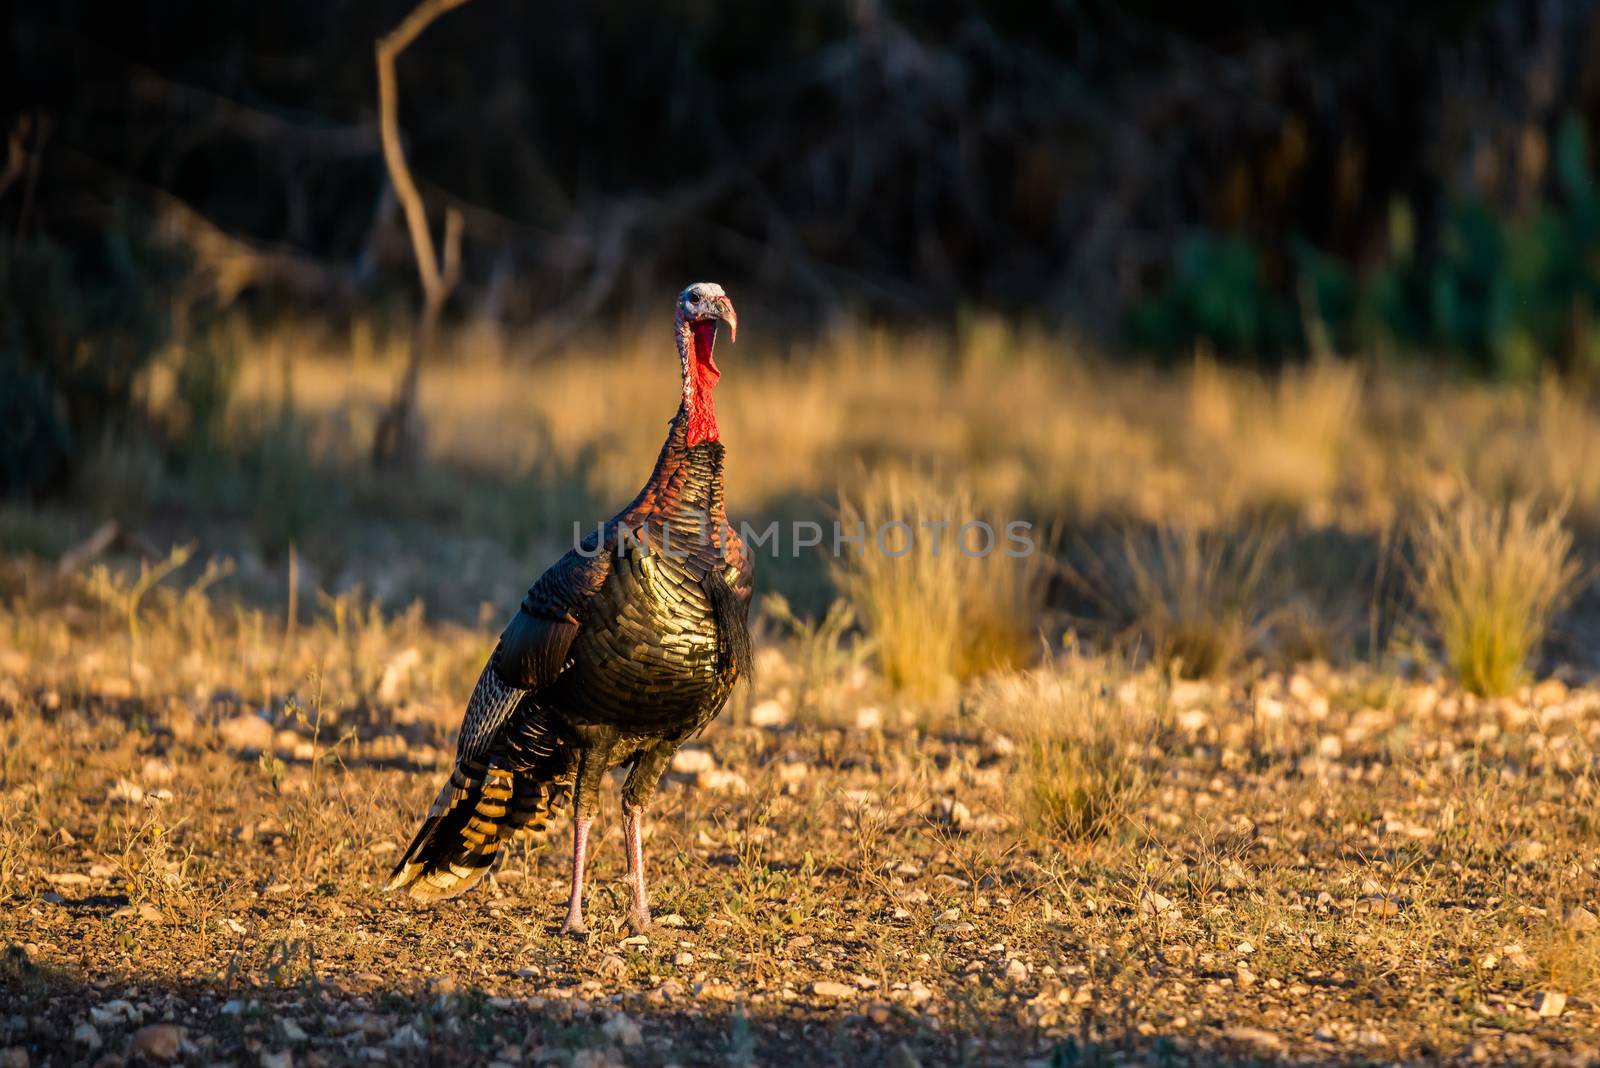 Wild South Texas Rio Grande turkey on alert looking in the distance